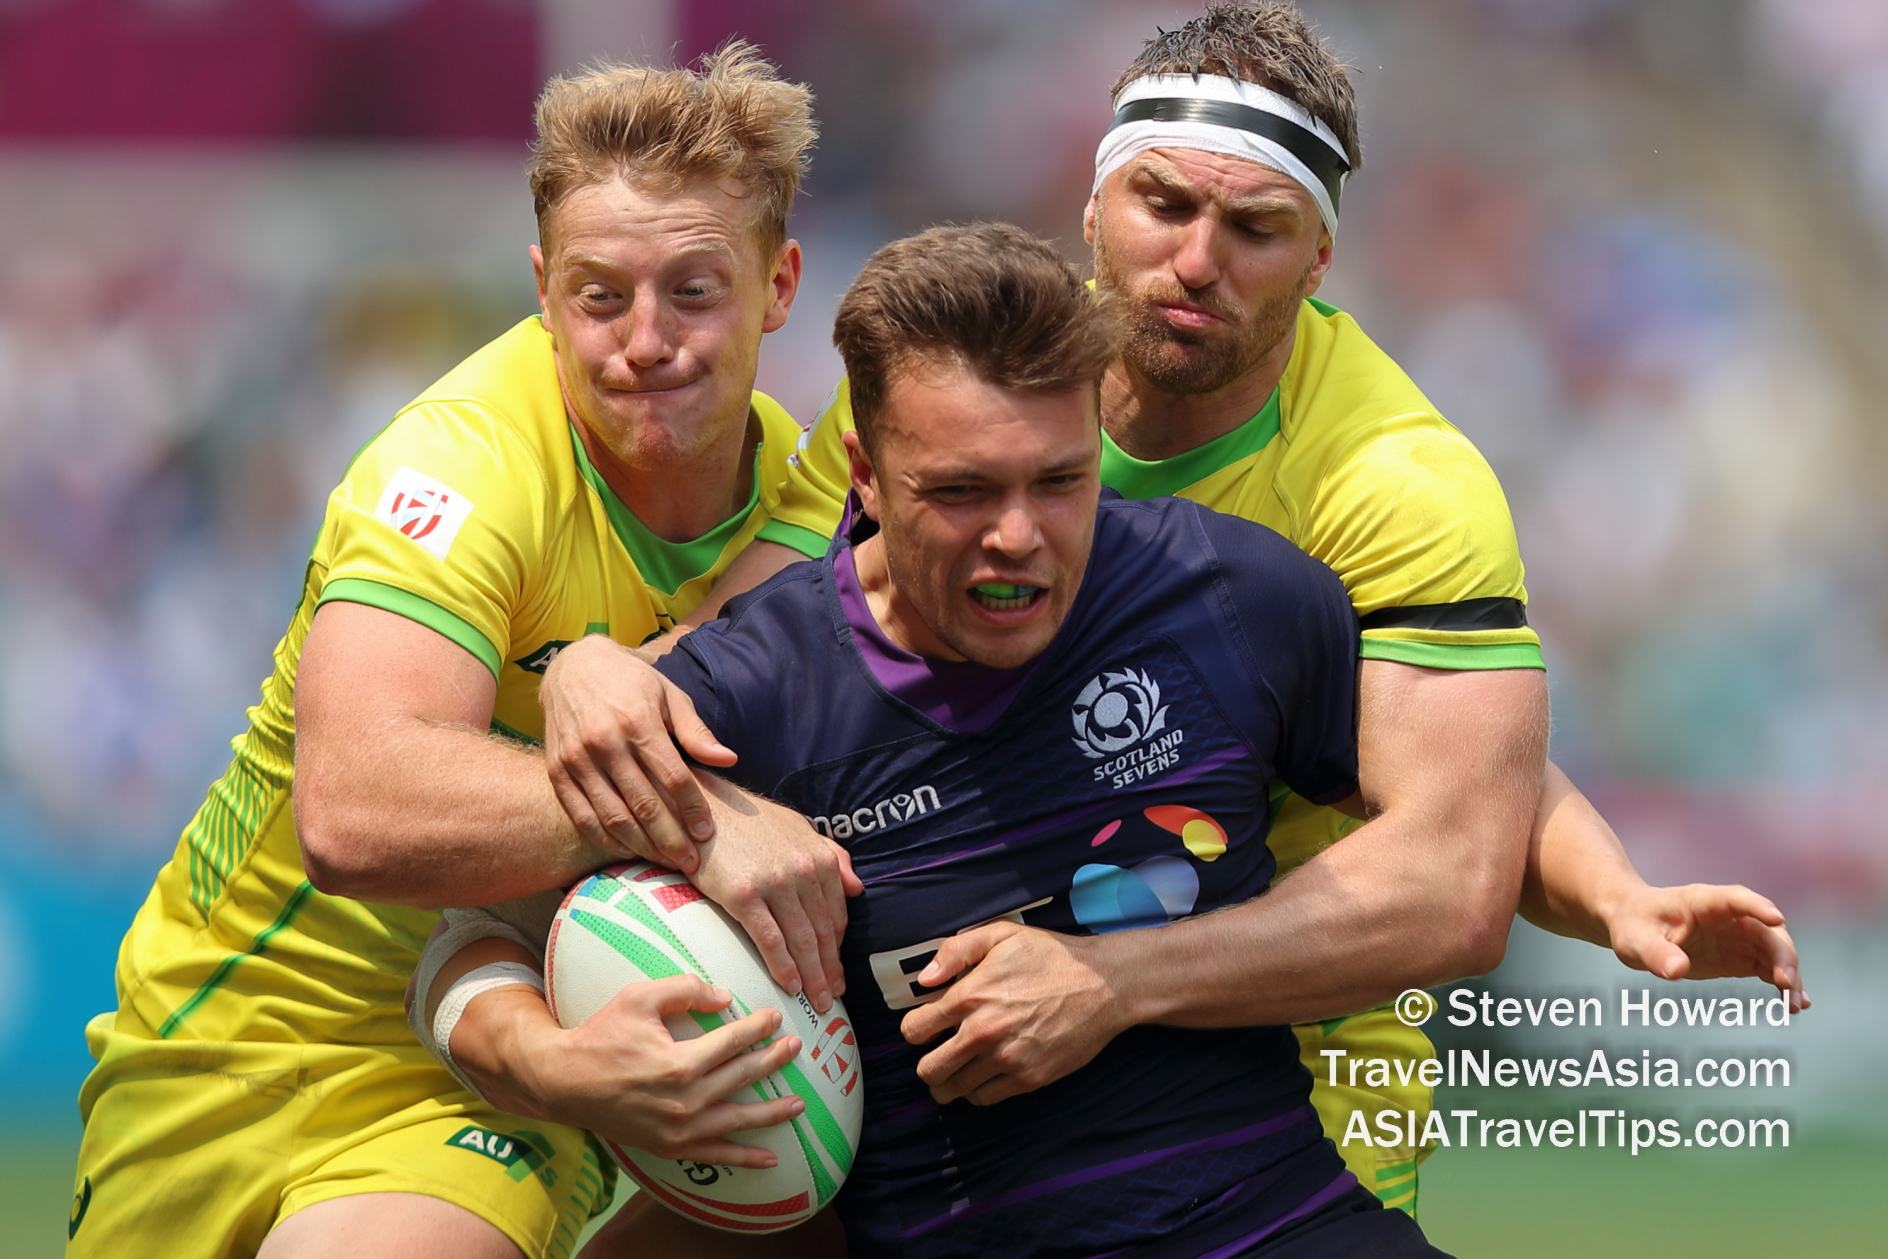 Scotland in action against Australia at the Hong Kong Sevens 2019. Picture by Steven Howard of TravelNewsAsia.com Click to enlarge.